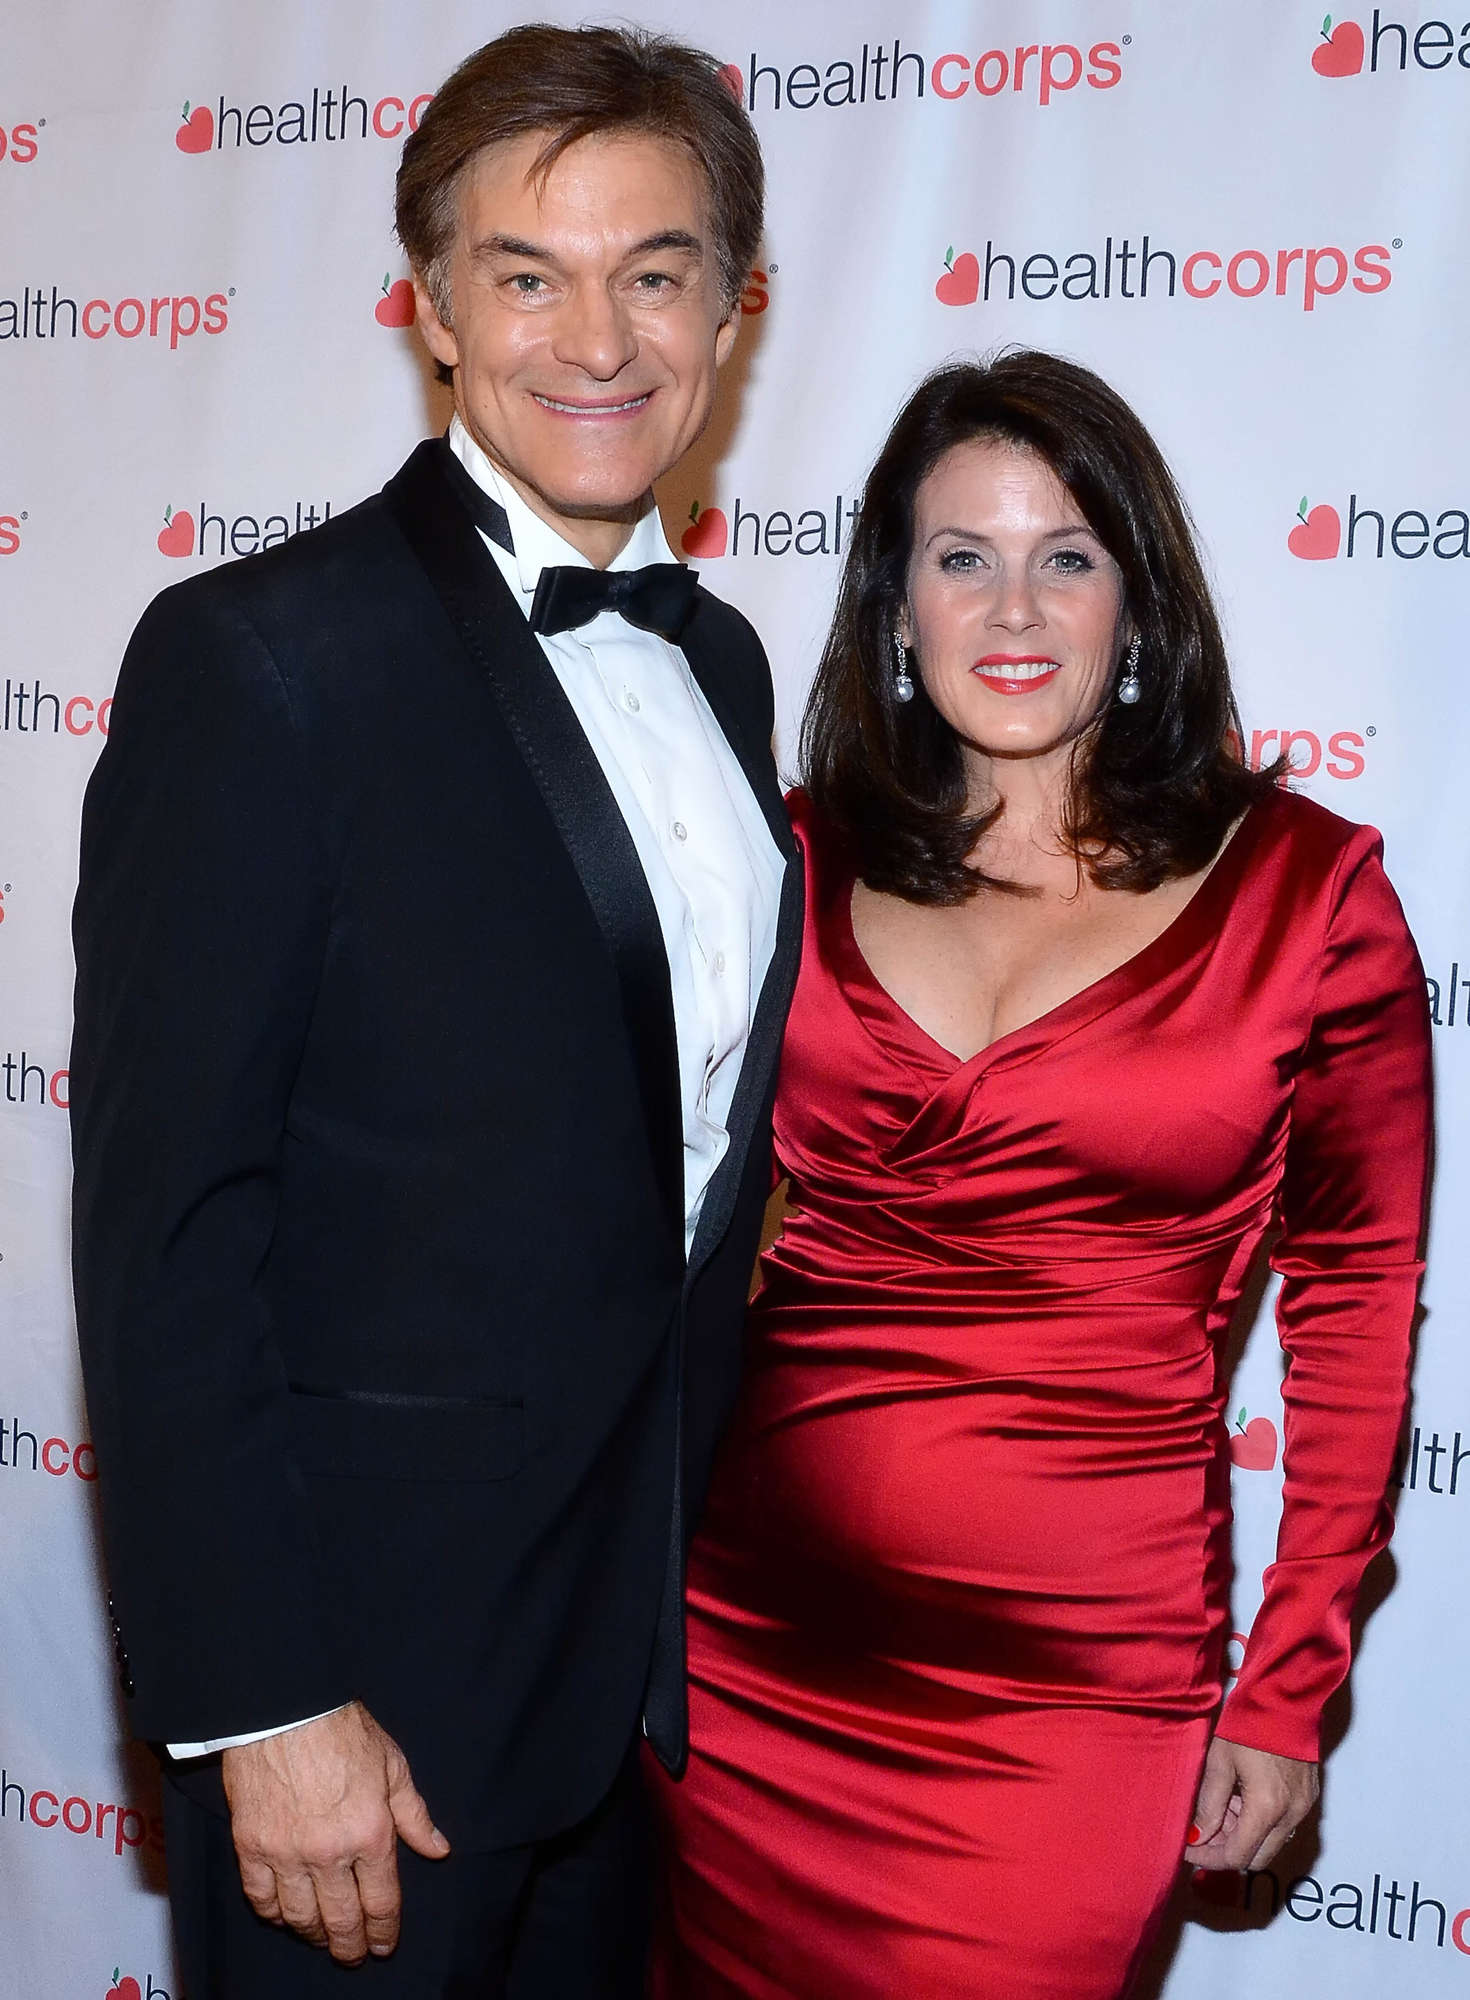 Lisa Oz - 10th Annual HealthCorps Gala held at Pier 60 in NY. 